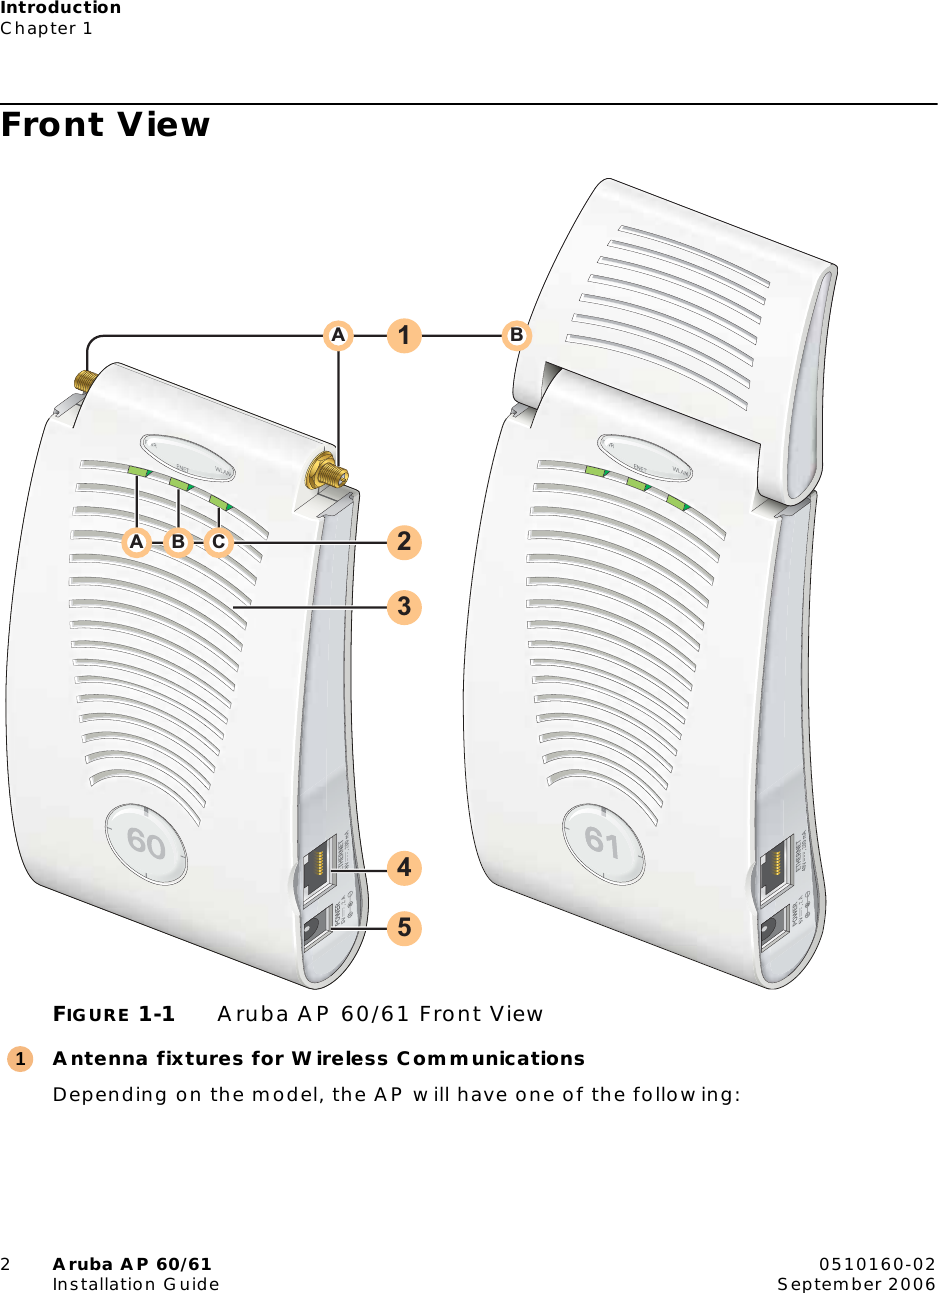 IntroductionChapter 12Aruba AP 60/61 0510160-02Installation Guide September 2006Front ViewFIGURE 1-1 Aruba AP 60/61 Front ViewAntenna fixtures for Wireless CommunicationsDepending on the model, the AP will have one of the following:12345A BCBA1